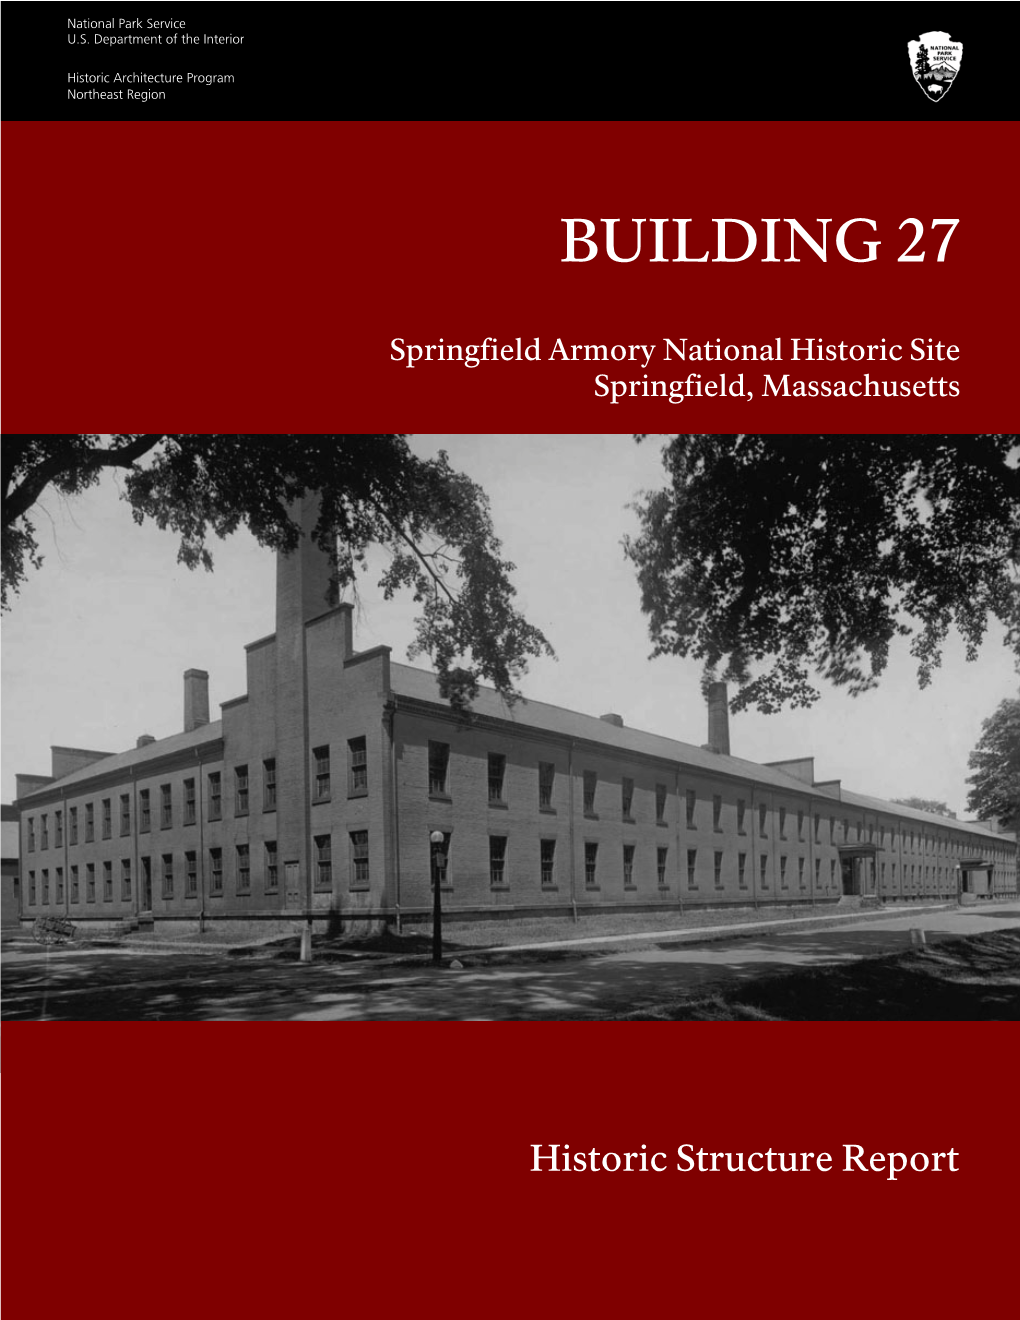 Historic Structure Report: Building 27, Springfield Armory National Historic